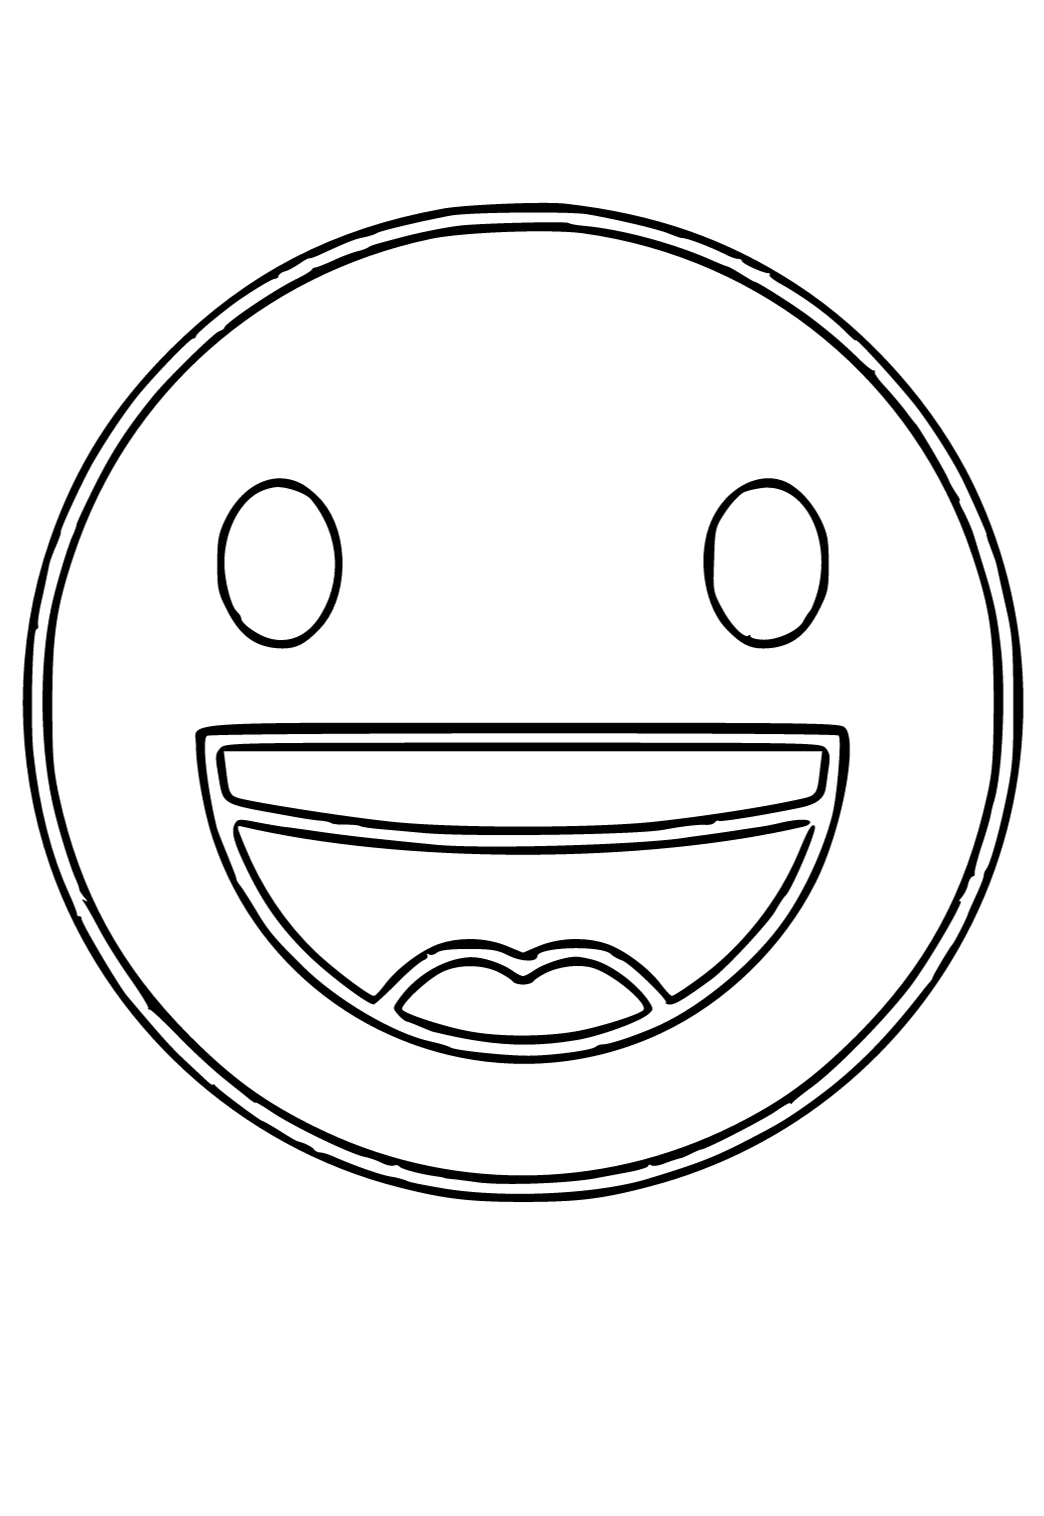 Free printable smiley face easy coloring page for adults and kids